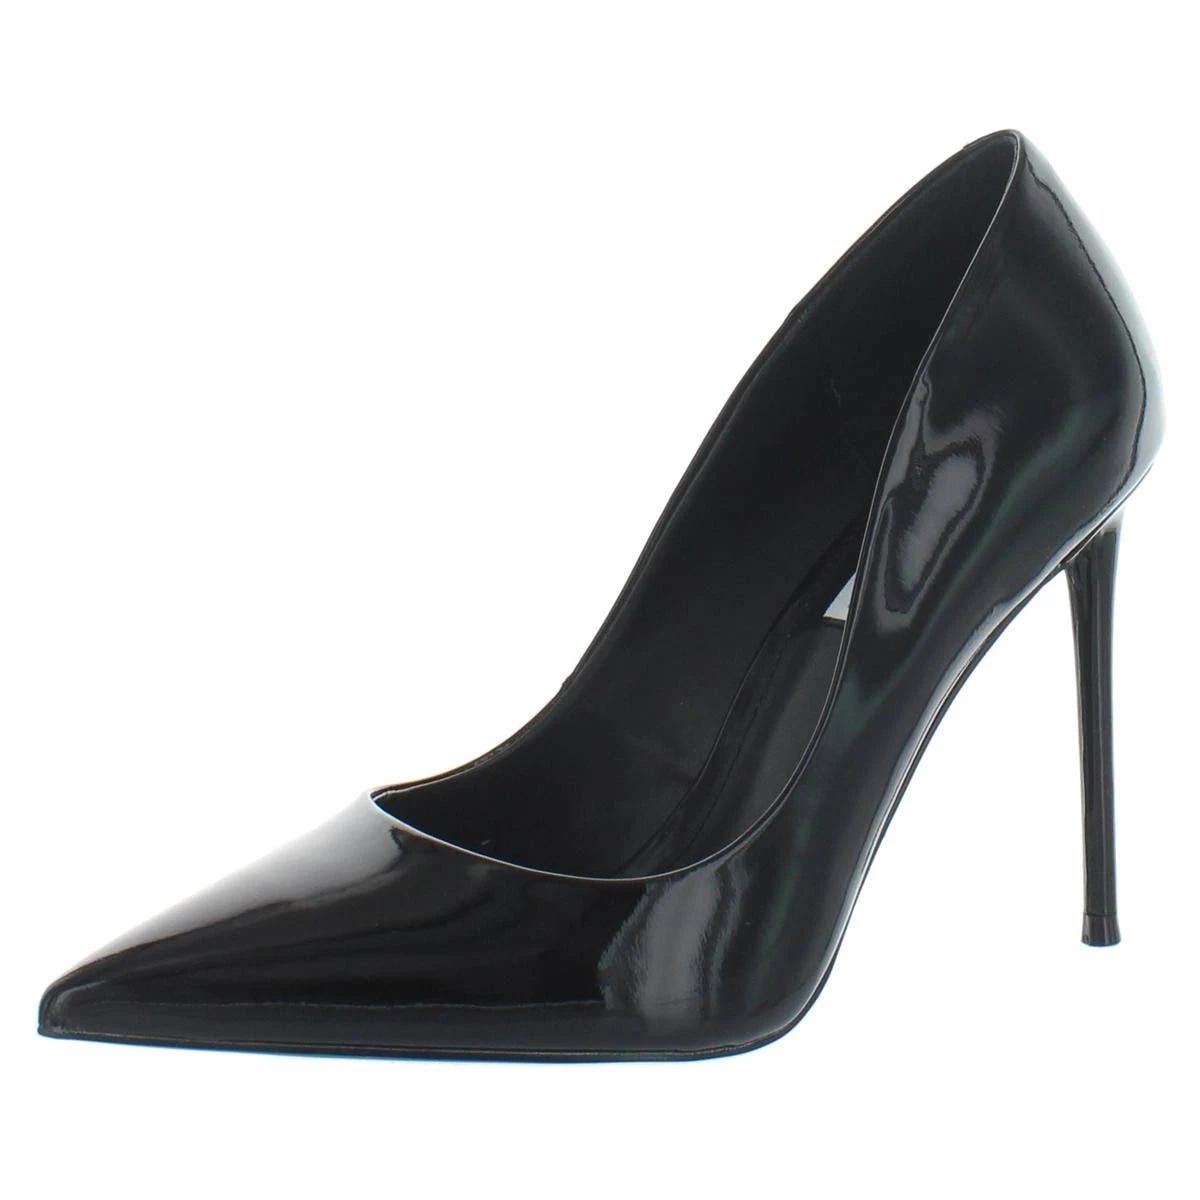 Stylish Pointed Toe Stiletto Pumps for Women | Image